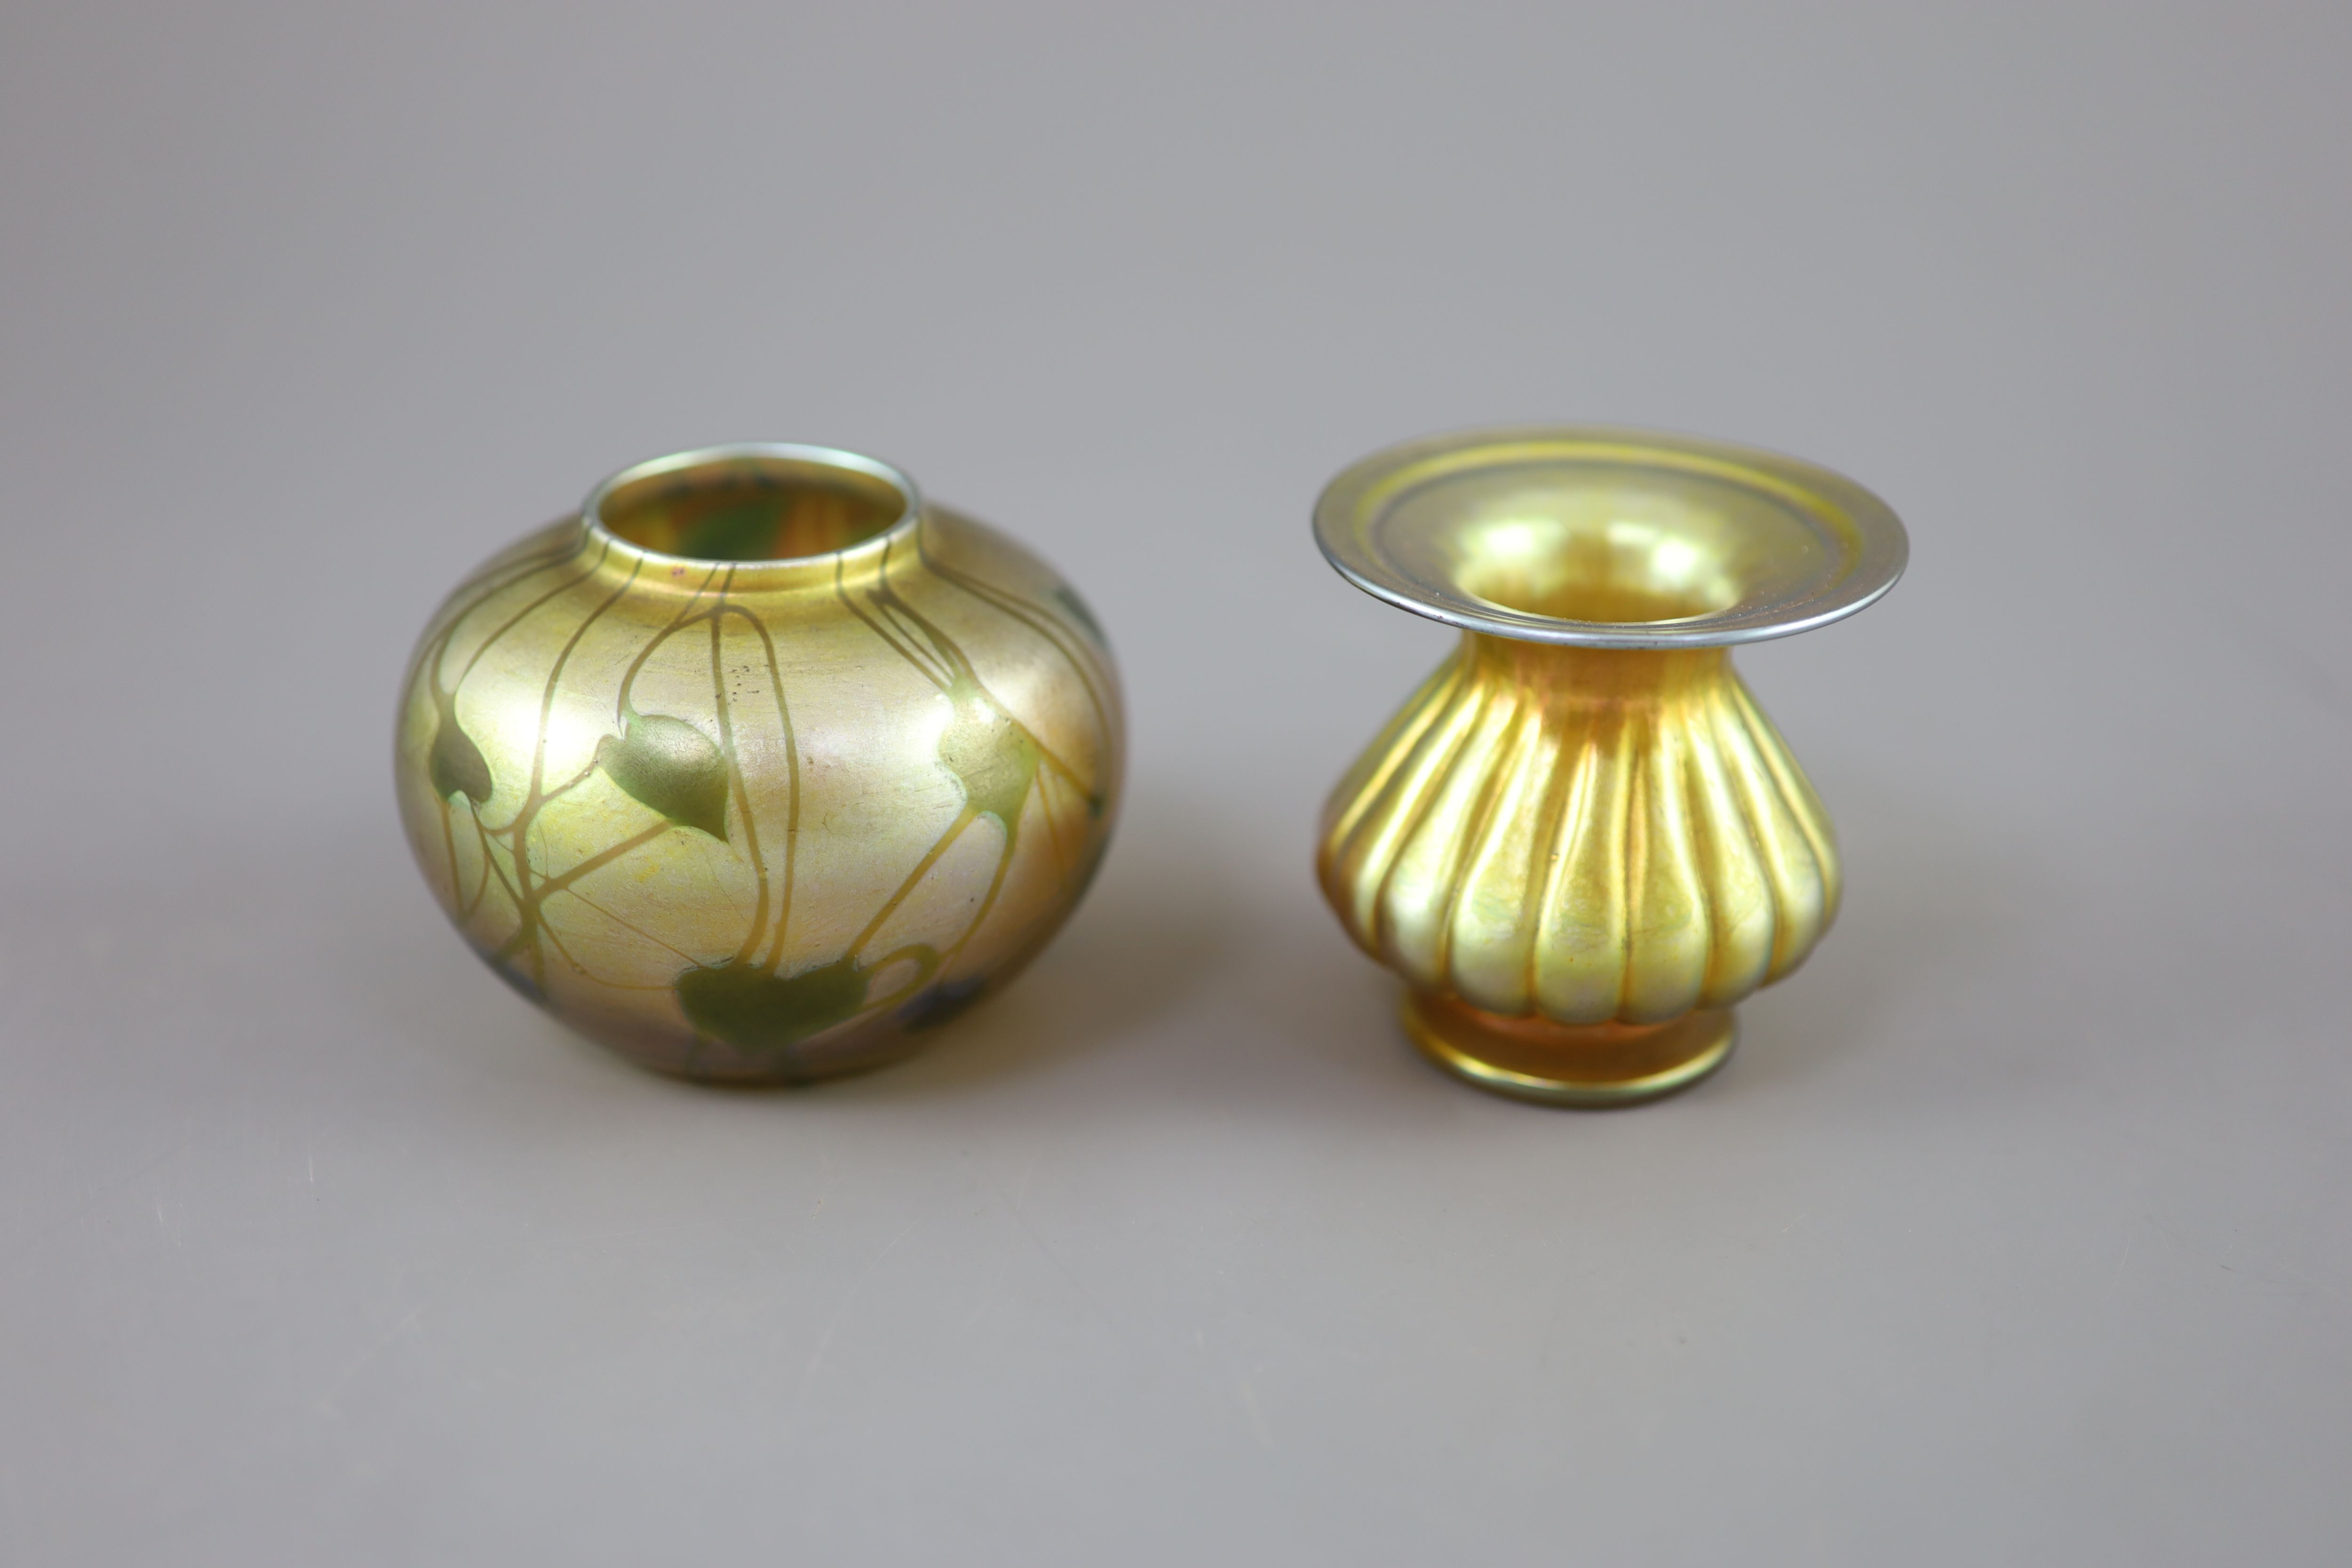 A Tiffany vine leaf pattern favrile iridescent glass vase and a Tiffany favrile lobed vase, early 20th century,